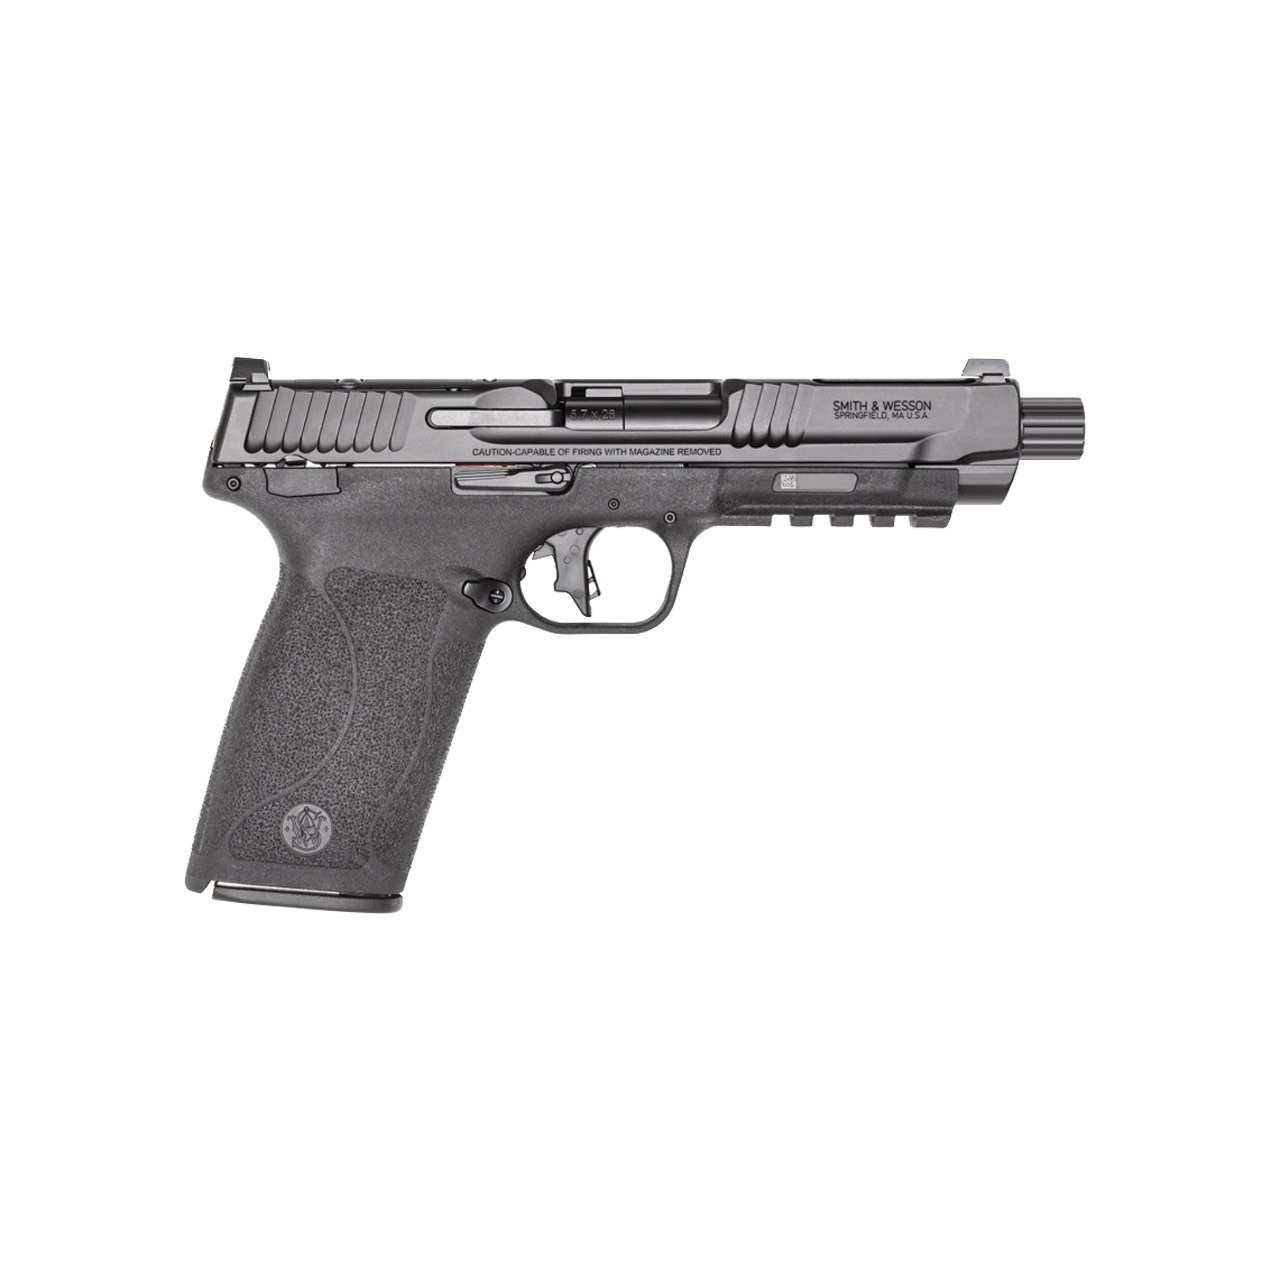 SMITH AND WESSON MP5.7, 5.7x28MM, 5" O/R, FLAT FACED TRIGGER, NO THUMB SAFETY, 22RDS